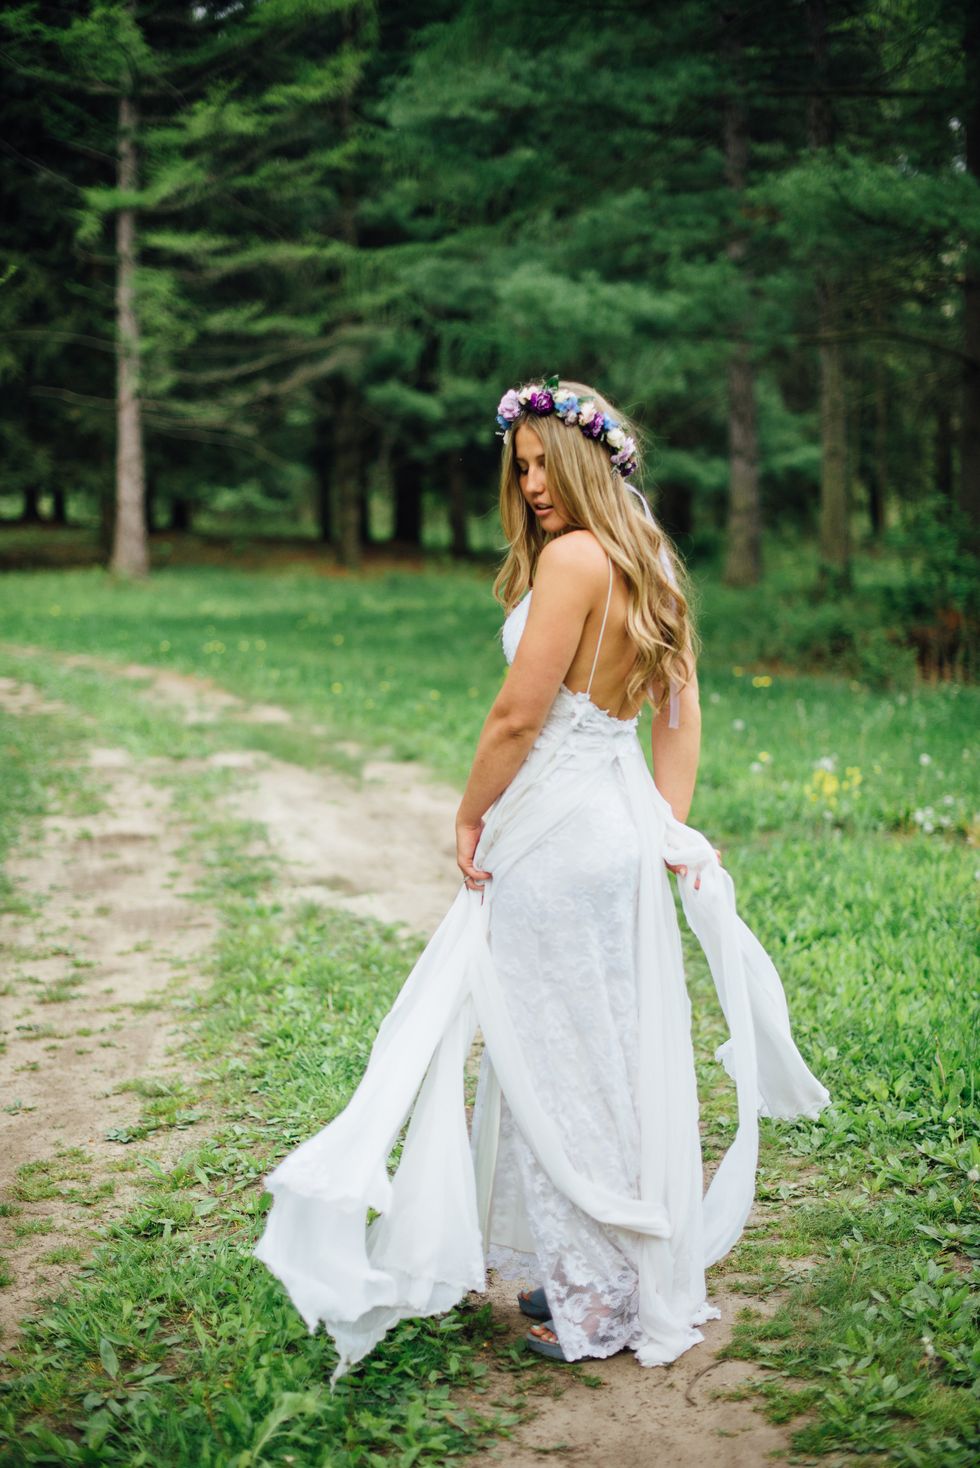 Clothing, Hair, Dress, Photograph, Bridal clothing, People in nature, Bride, Wedding dress, Summer, Gown, 